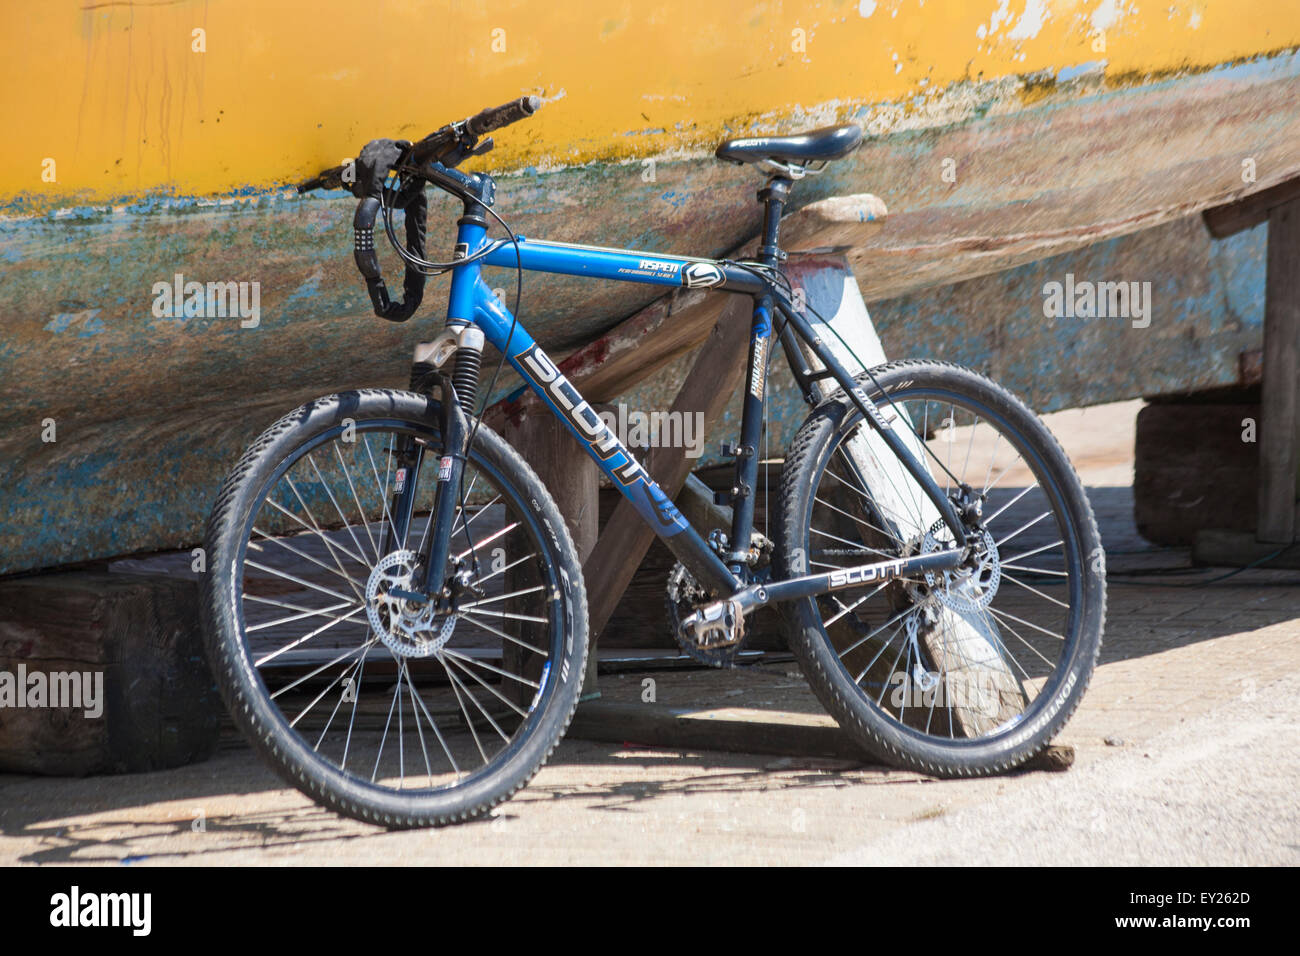 Scott Aspen performance series Pro/Spec reflex geometry bicycle leant  against boat with peeling paint at Poole Stock Photo - Alamy